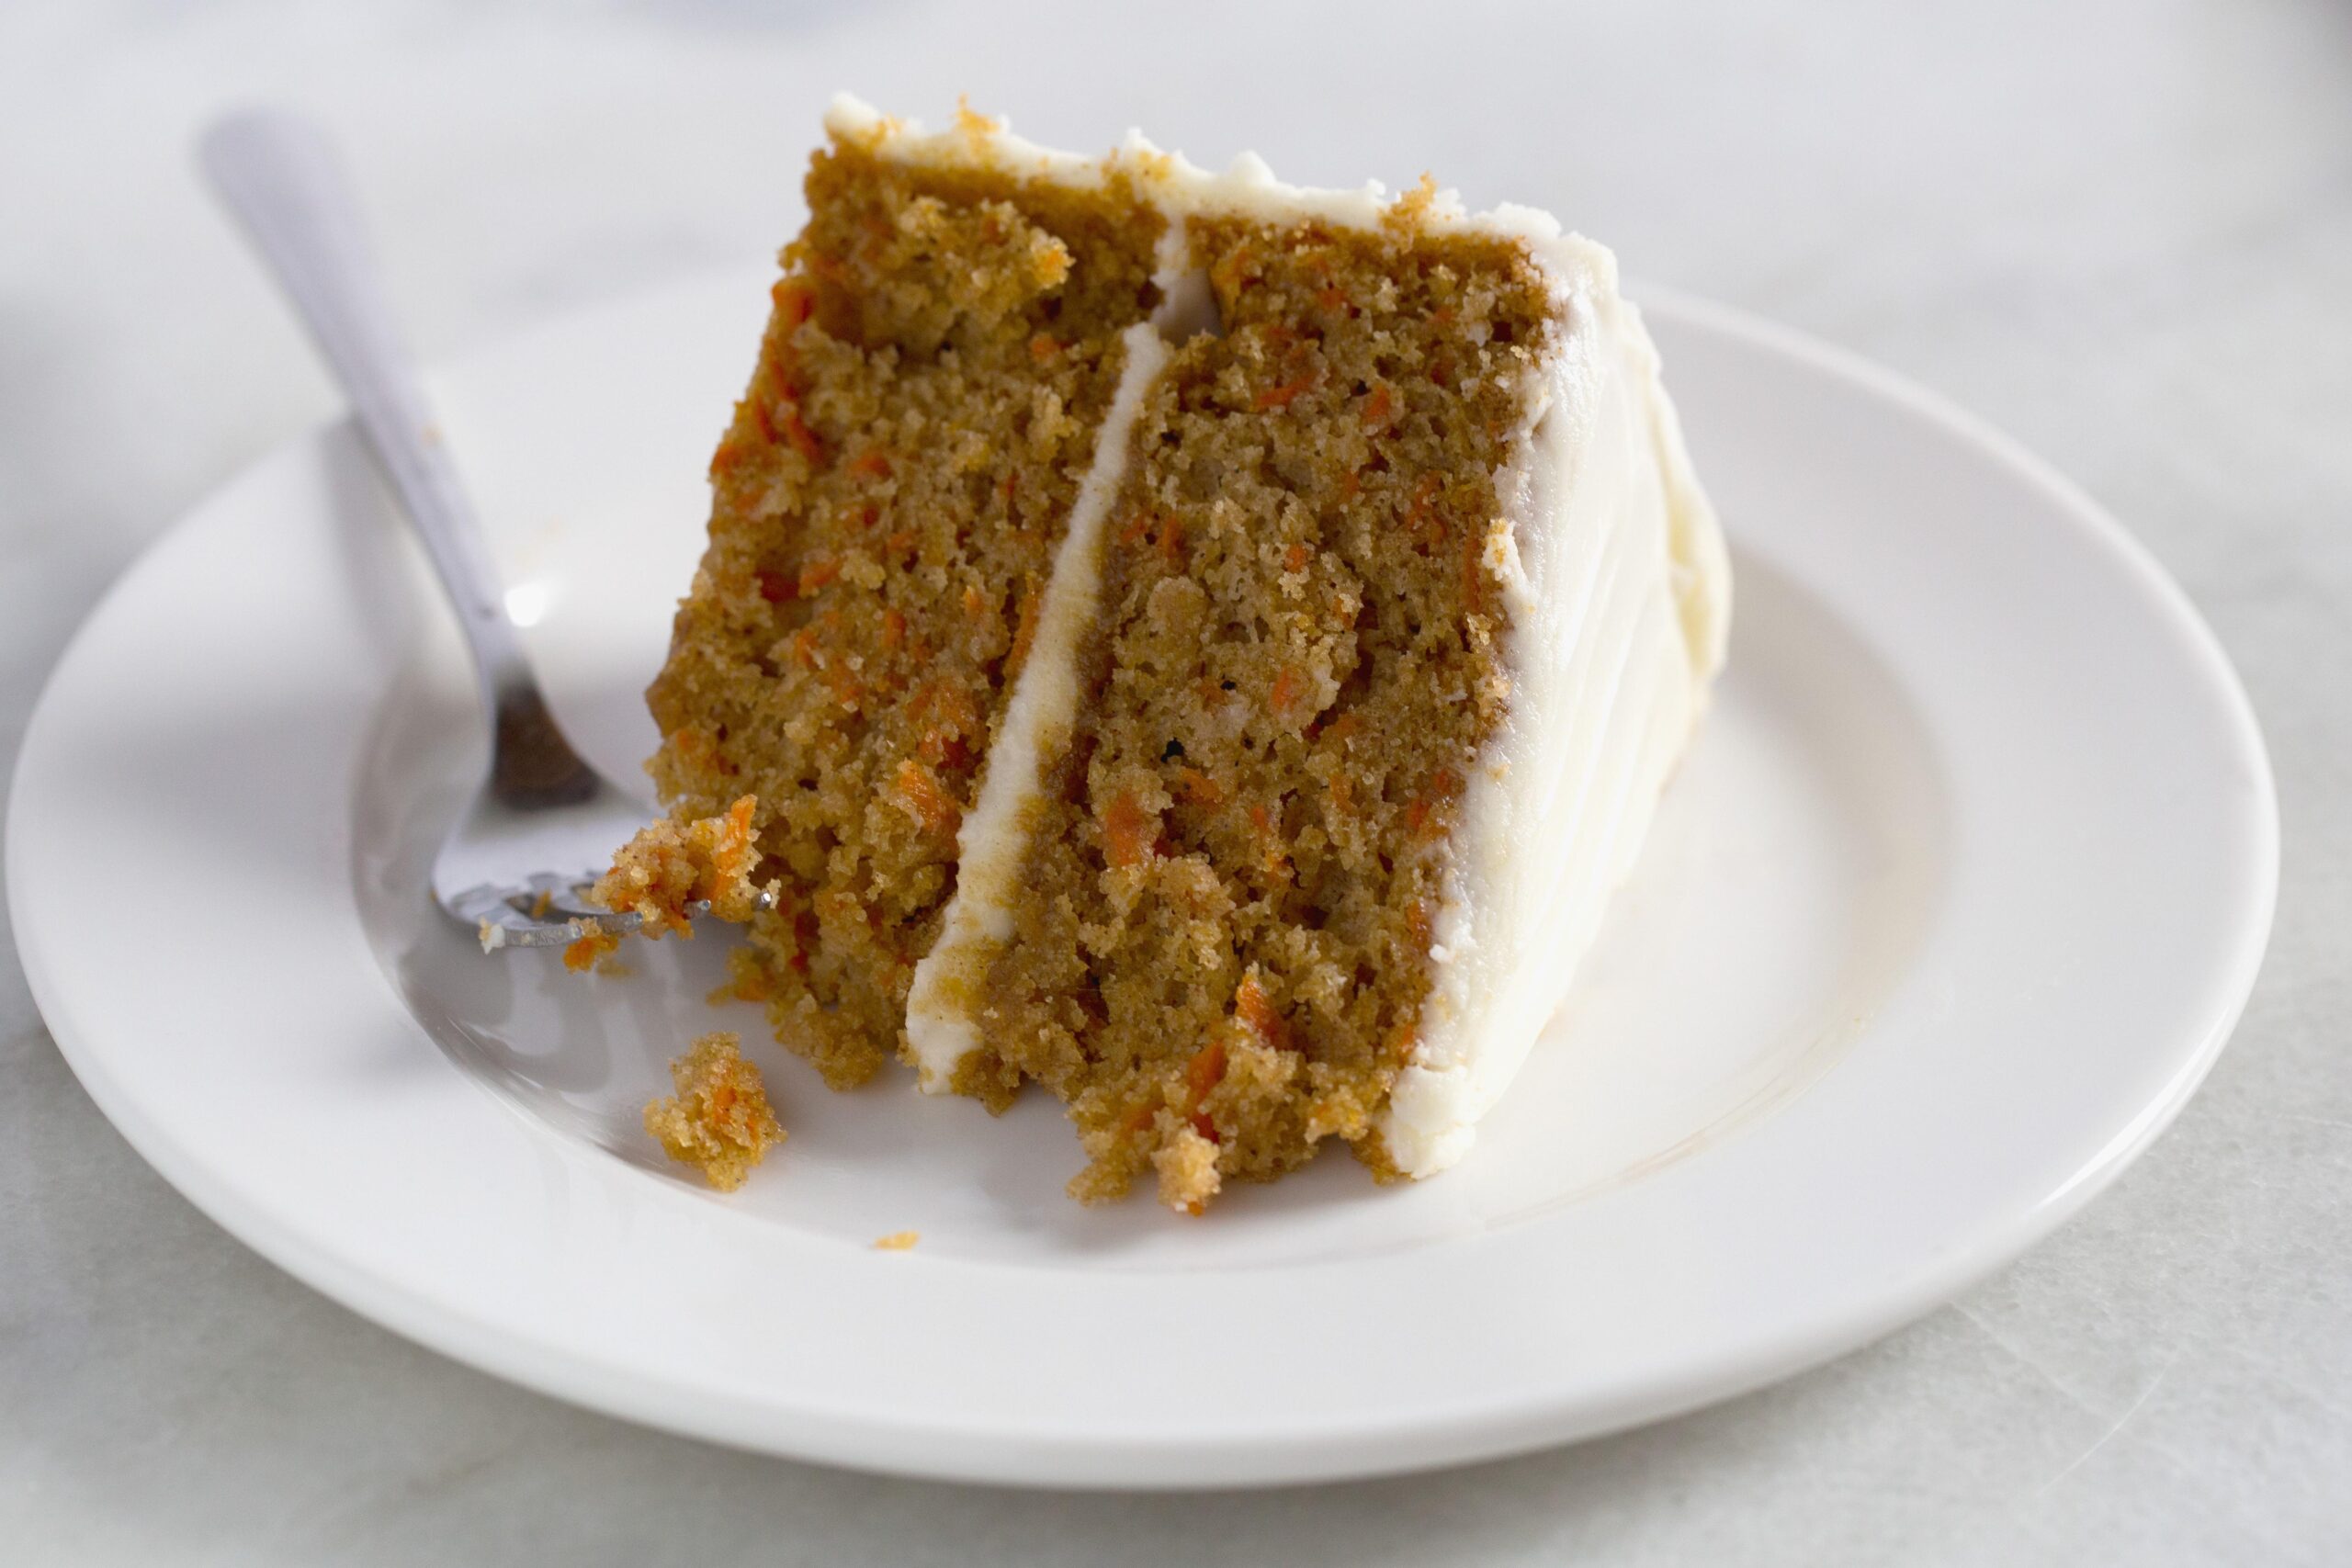  Free-From Carrot Cake Goodness.